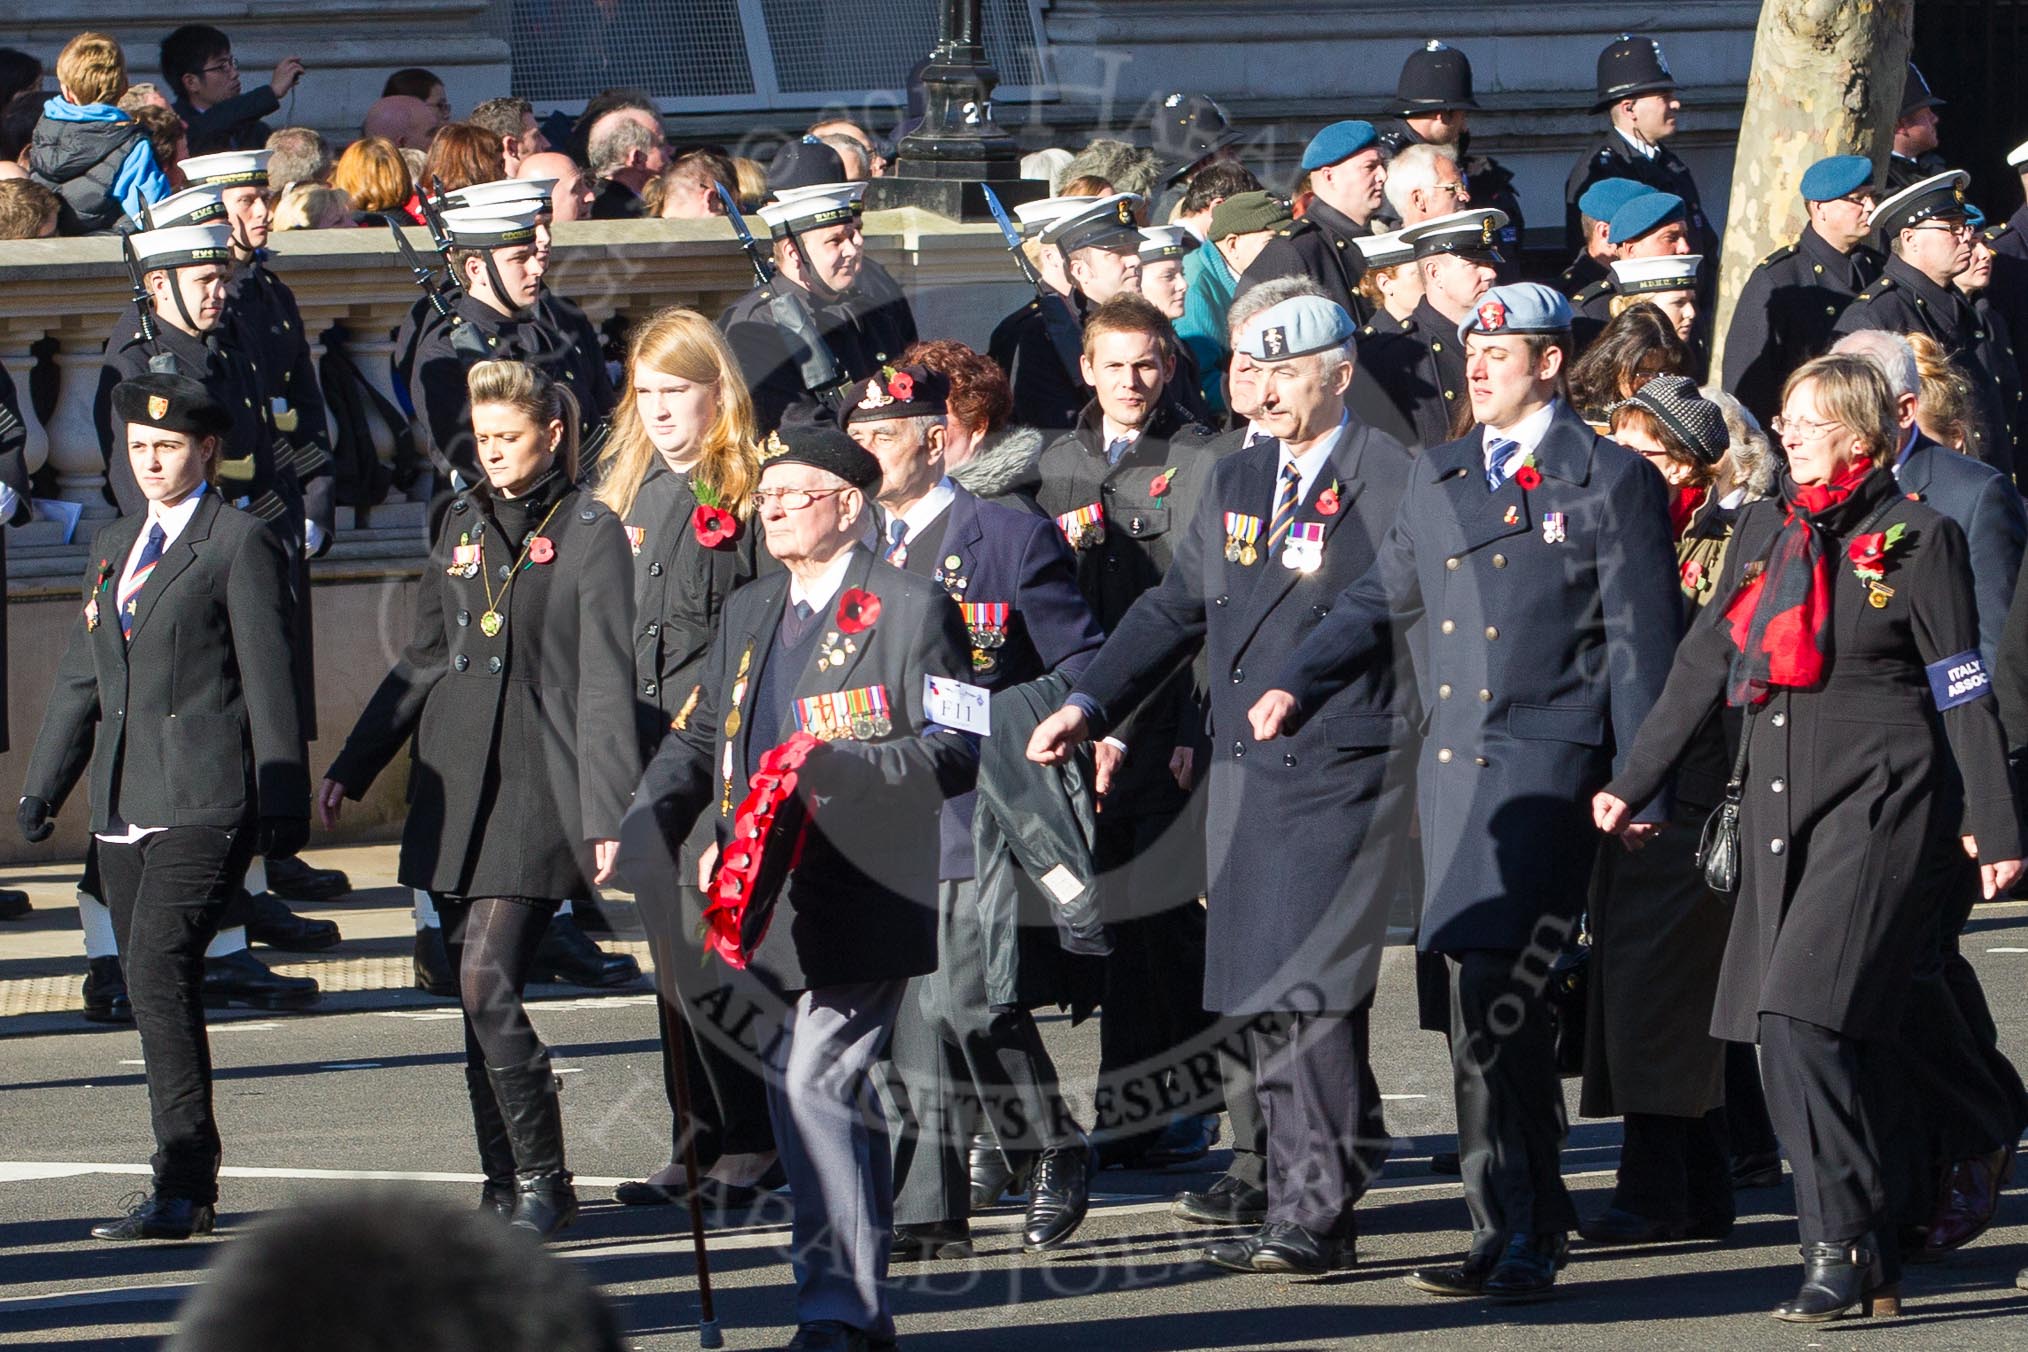 Remembrance Sunday 2012 Cenotaph March Past: Group F11 - Italy Star Association..
Whitehall, Cenotaph,
London SW1,

United Kingdom,
on 11 November 2012 at 11:46, image #460